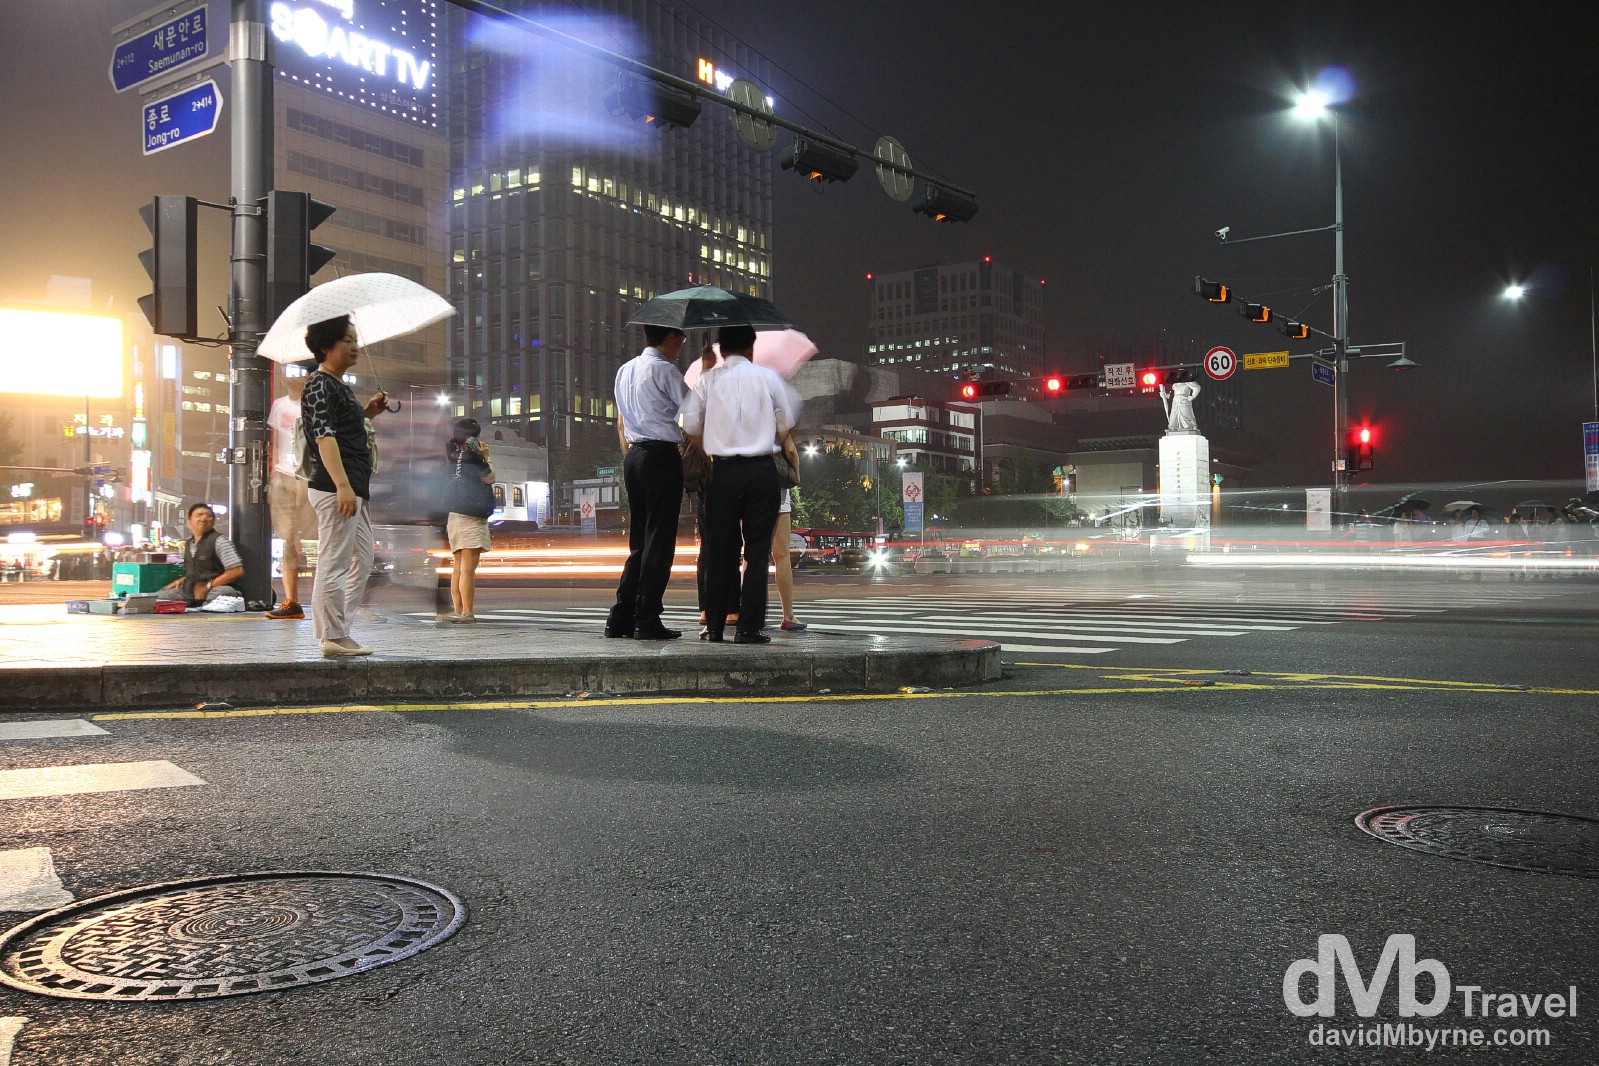 Waiting in the light rain at a traffic junction in Jongno, Seoul, South Korea. July 12th 2012.